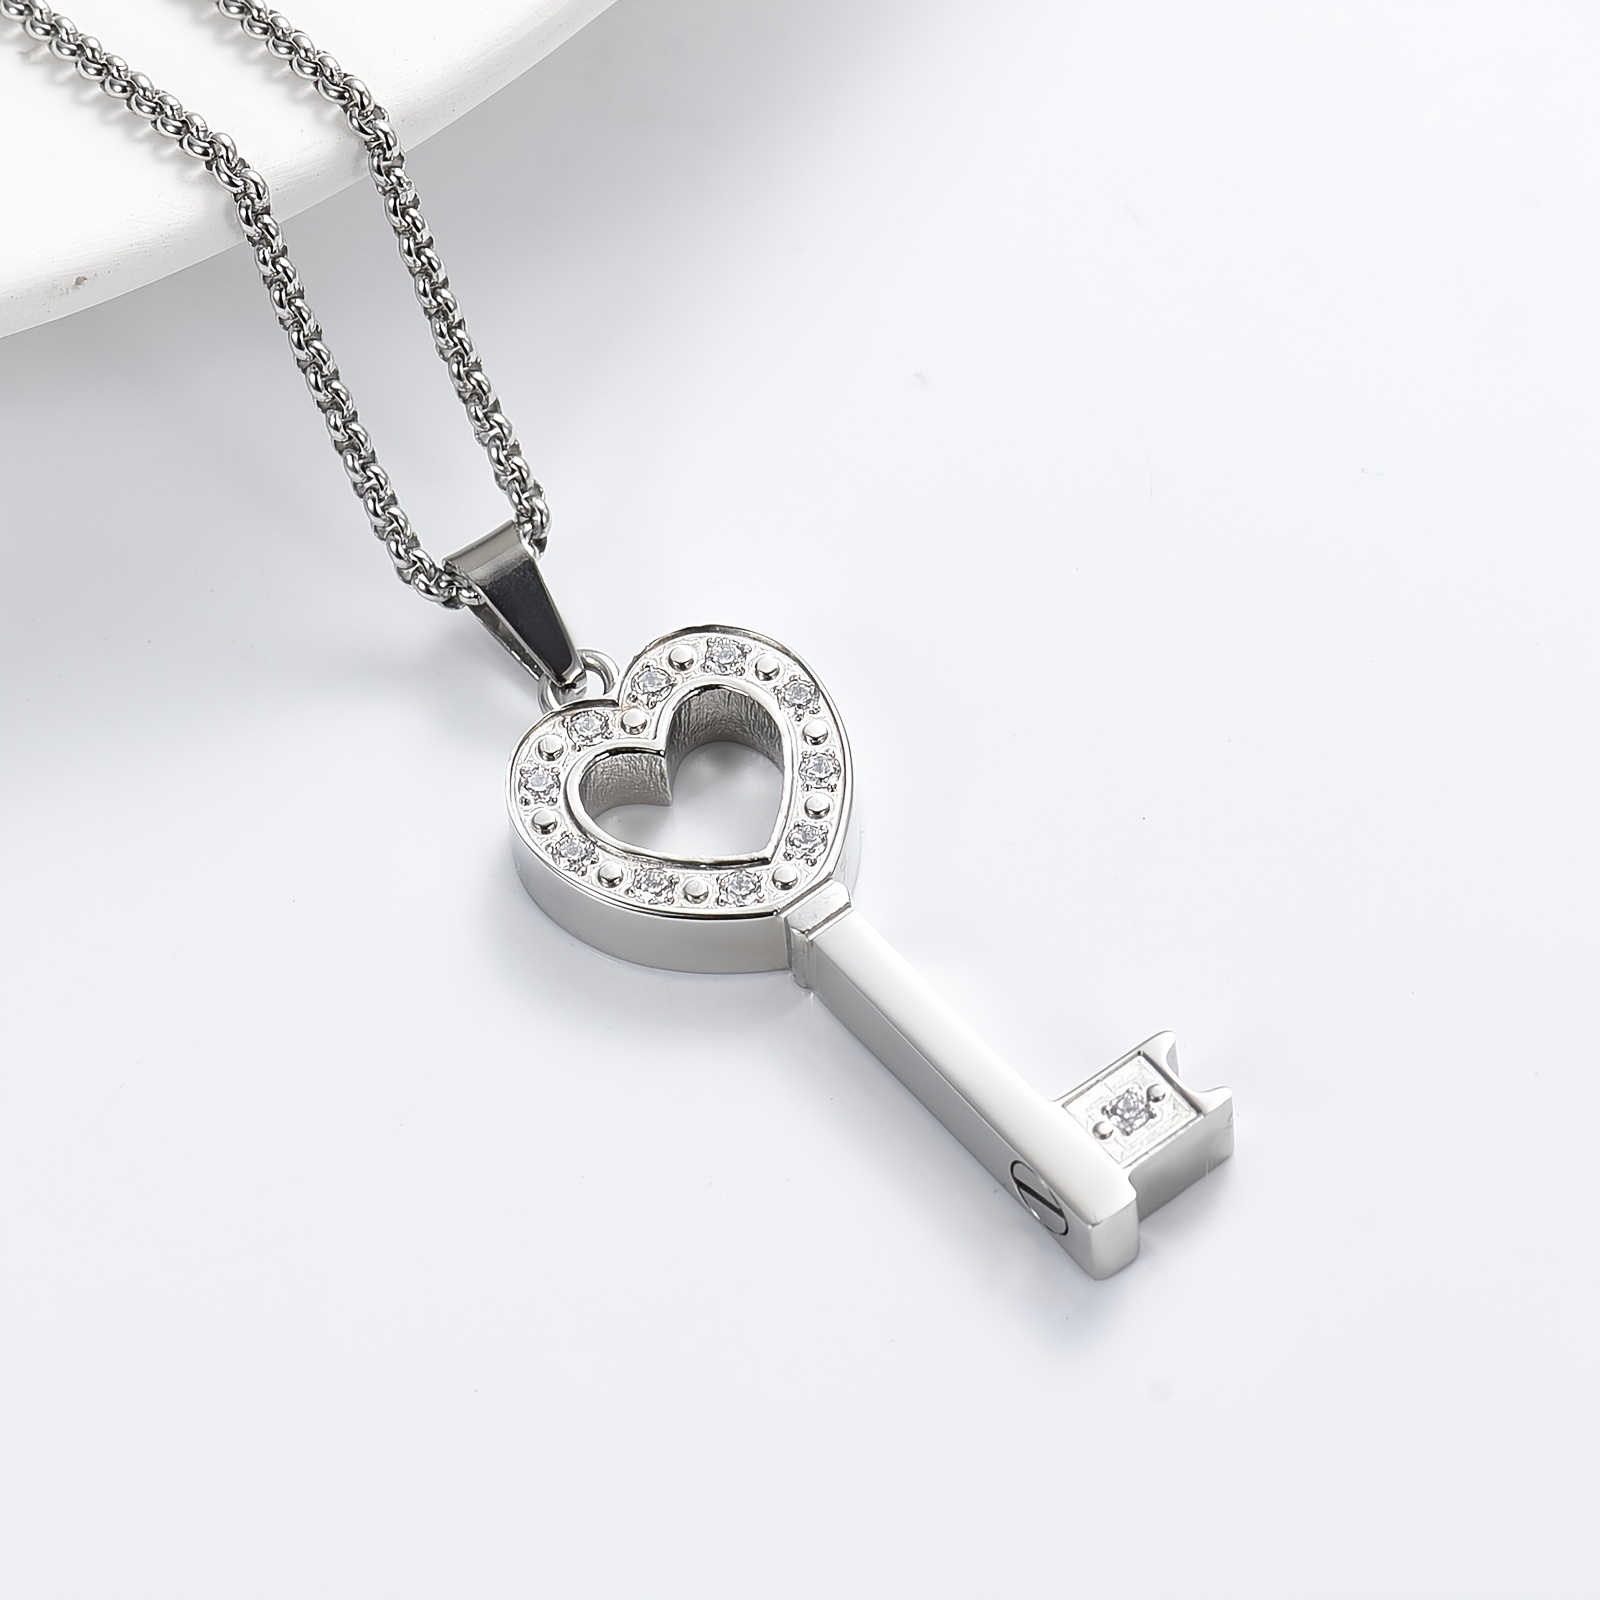 Silver Heart Shaped Lock & Key Charm Cremation Jewelry - Ash Necklace